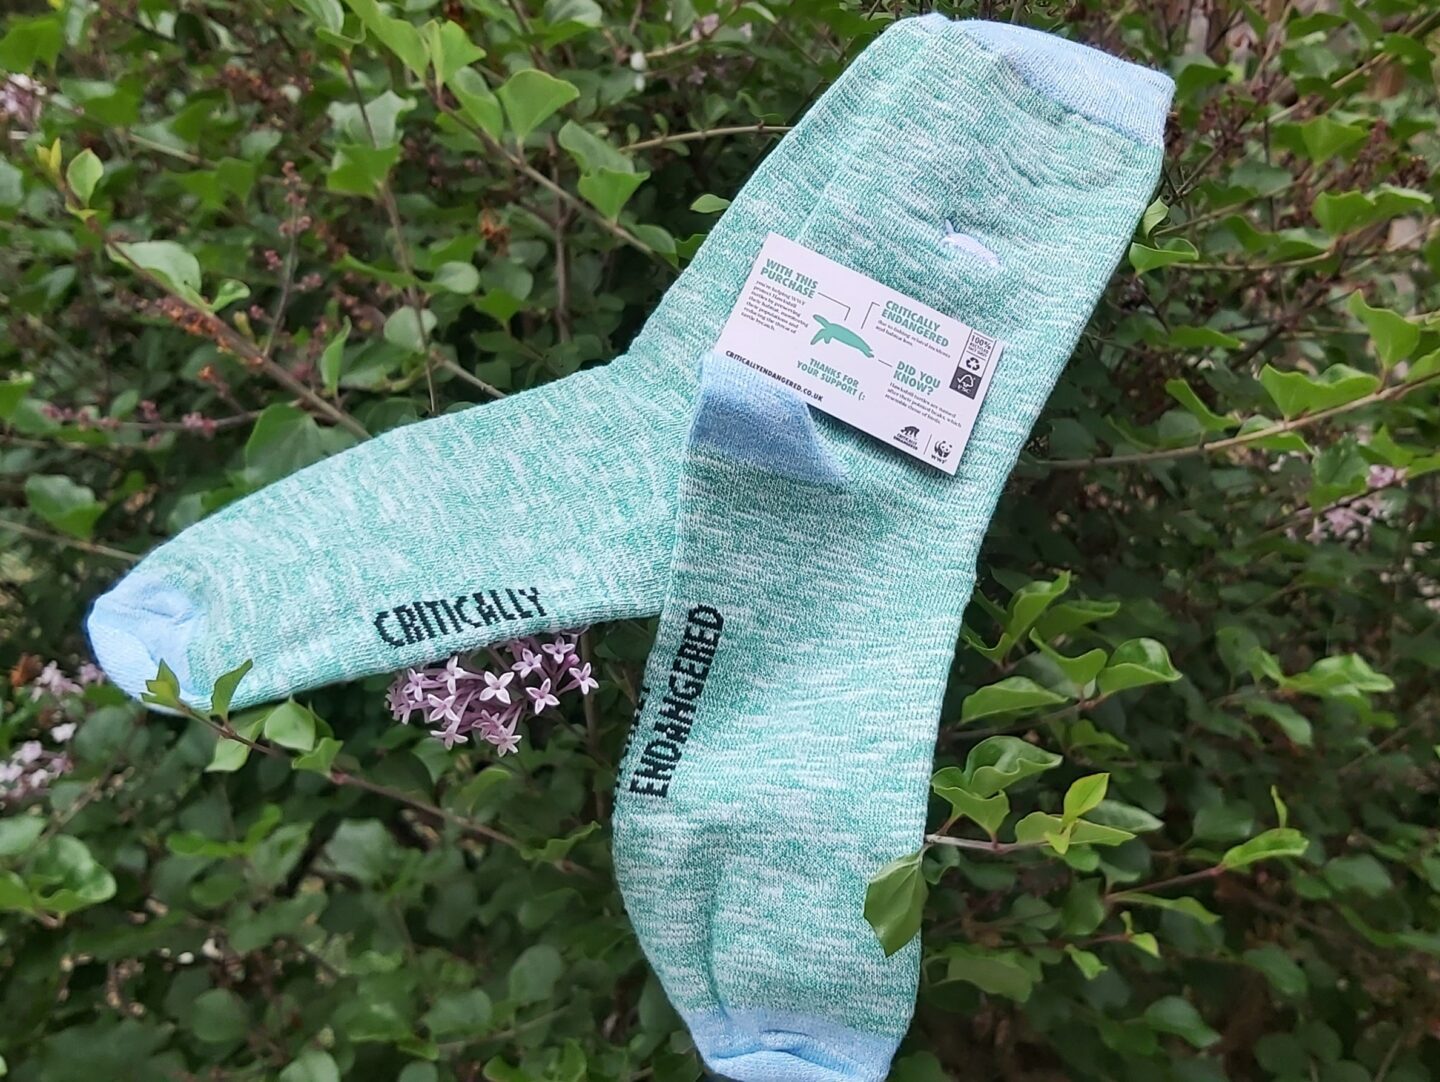 turquoise critically endangered socks displayed against green leaves and a few small purple flowers - these socks are suggested as gifts for hikers